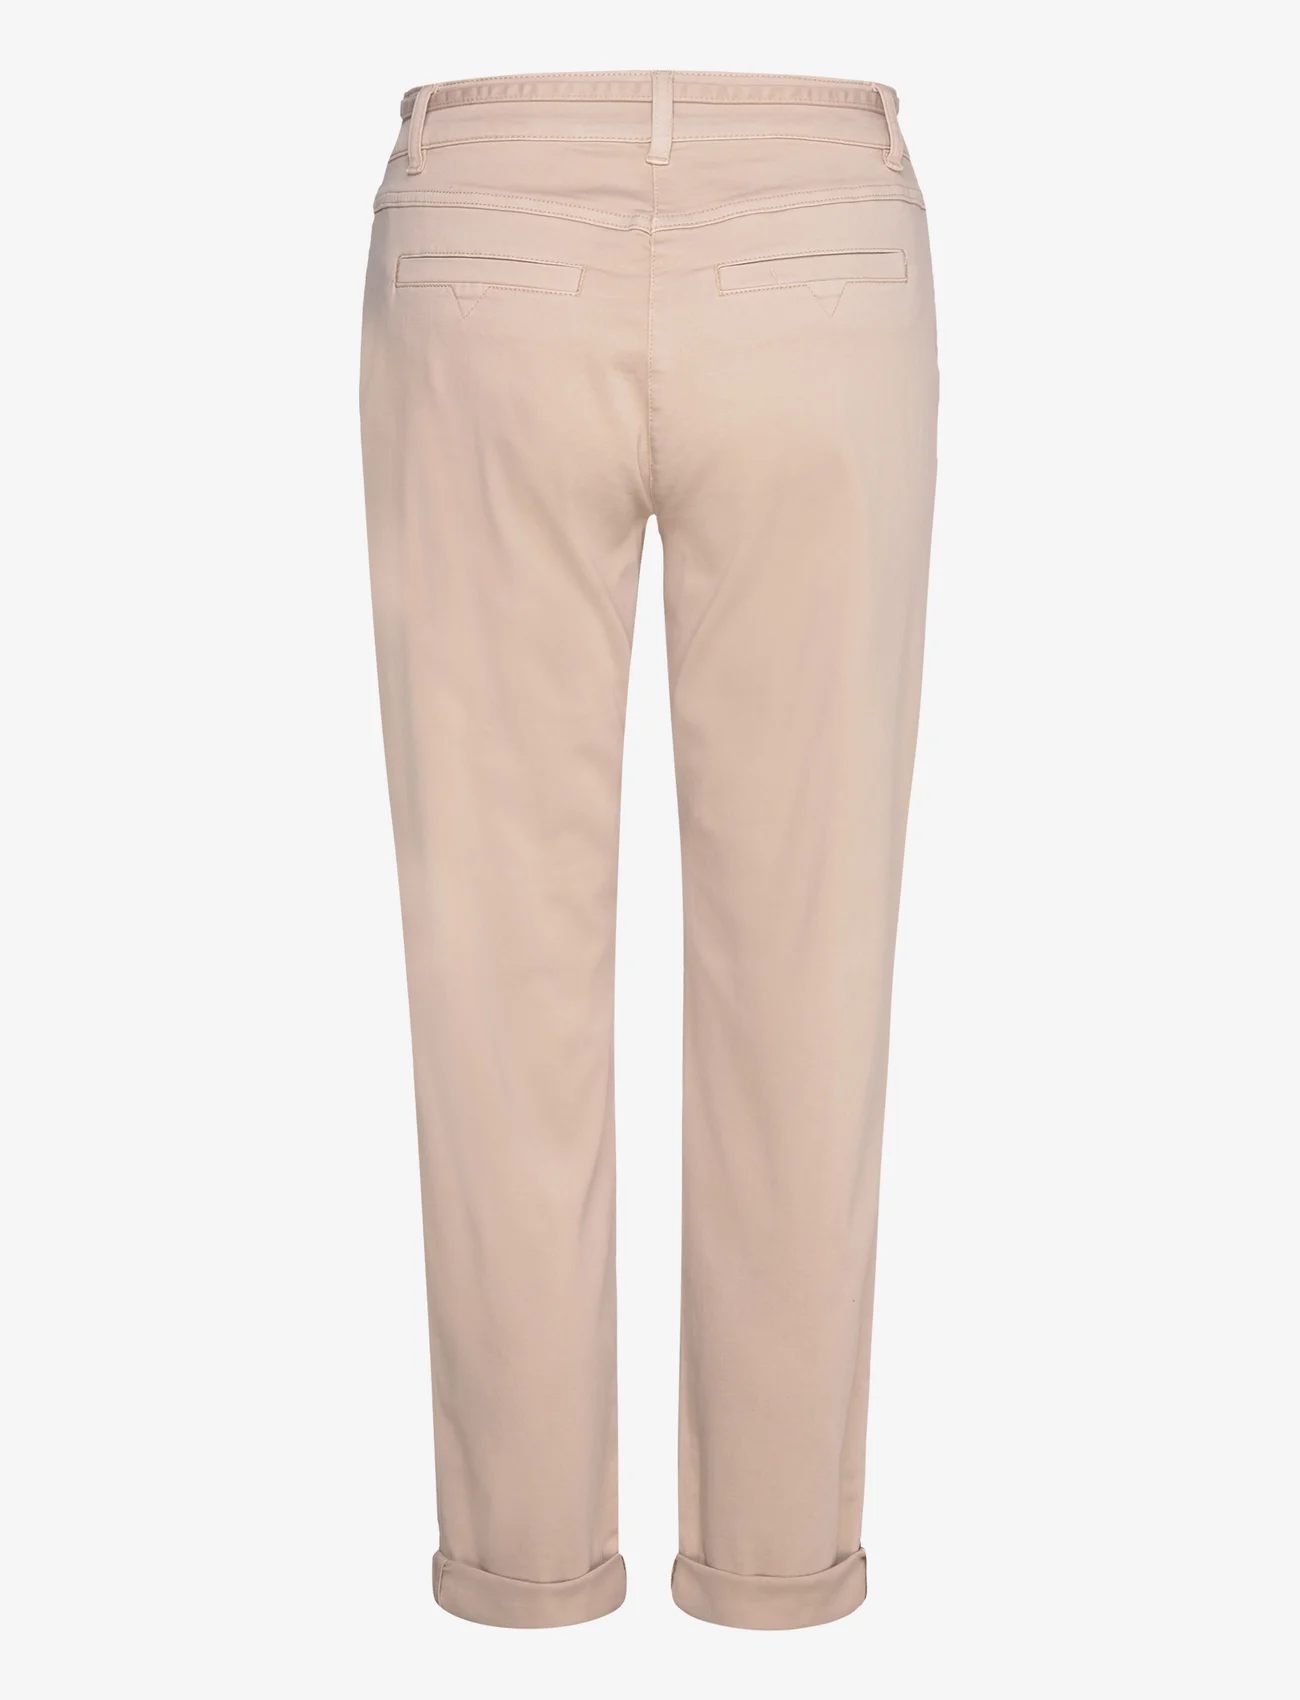 Gerry Weber Edition - PANT LEISURE CROPPED - chino's - nomand - 1